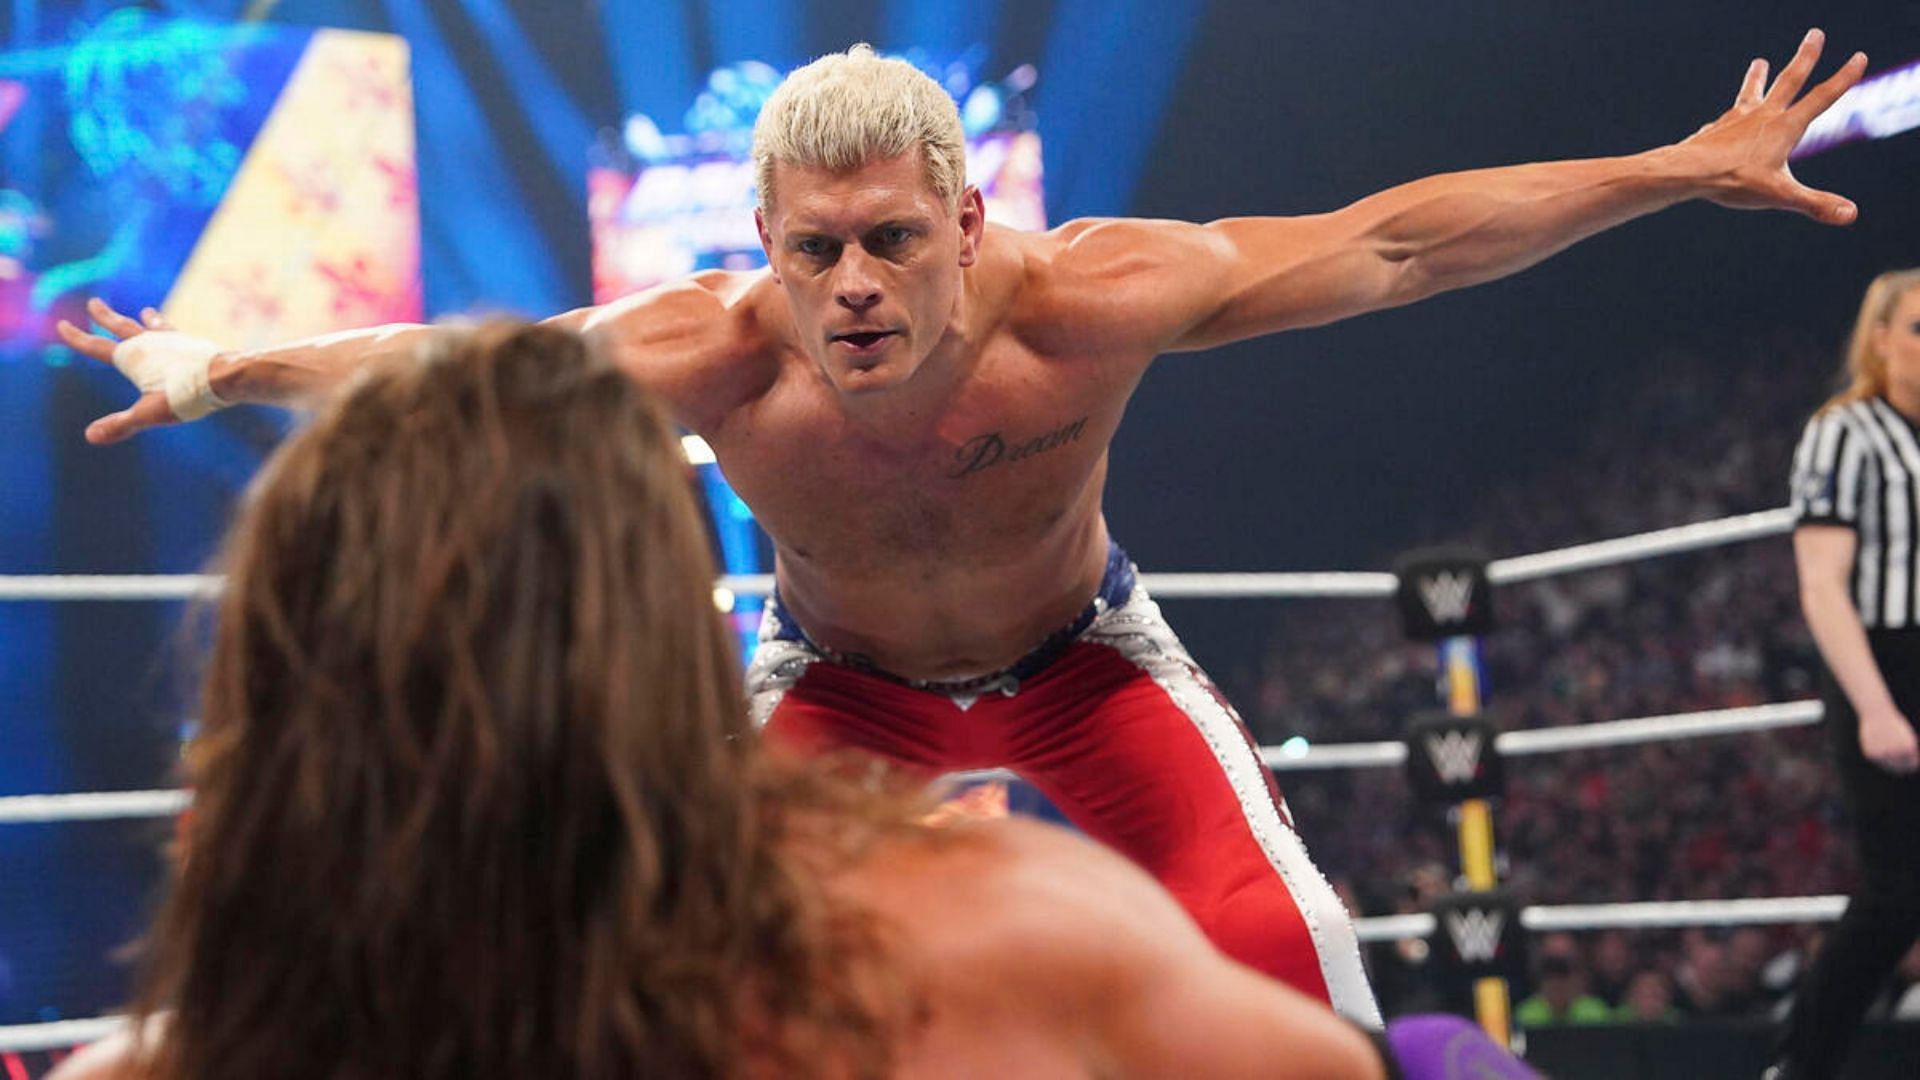 Cody Rhodes defeated AJ Styles in the main event of Backlash: France